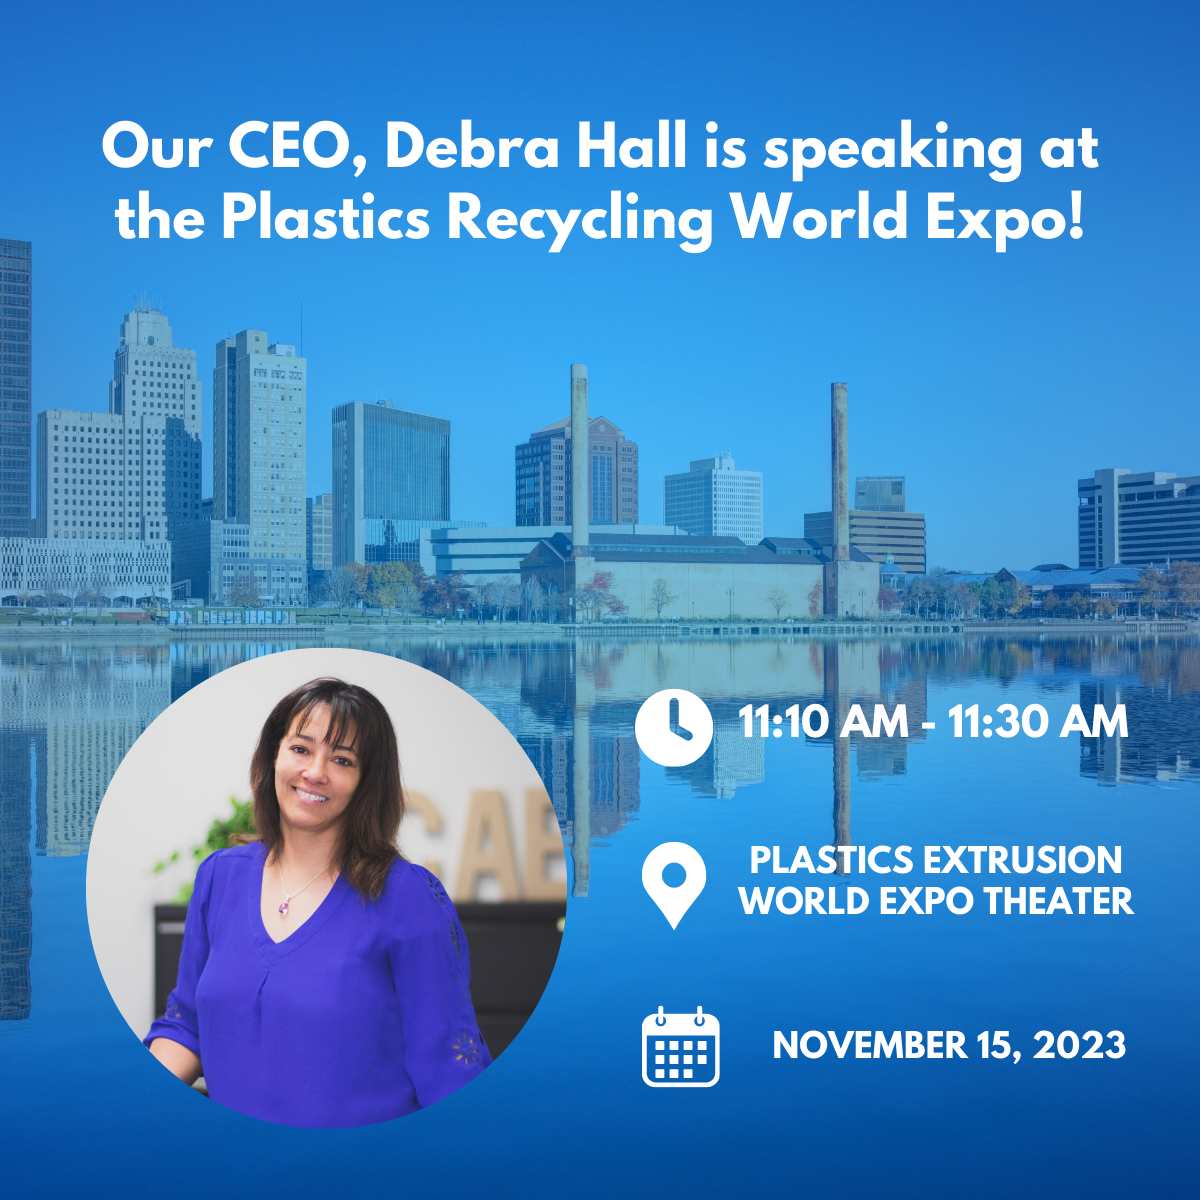 Our CEO Debra Hall is thrilled to be speaking at the Plastics Recycling World Expo! 